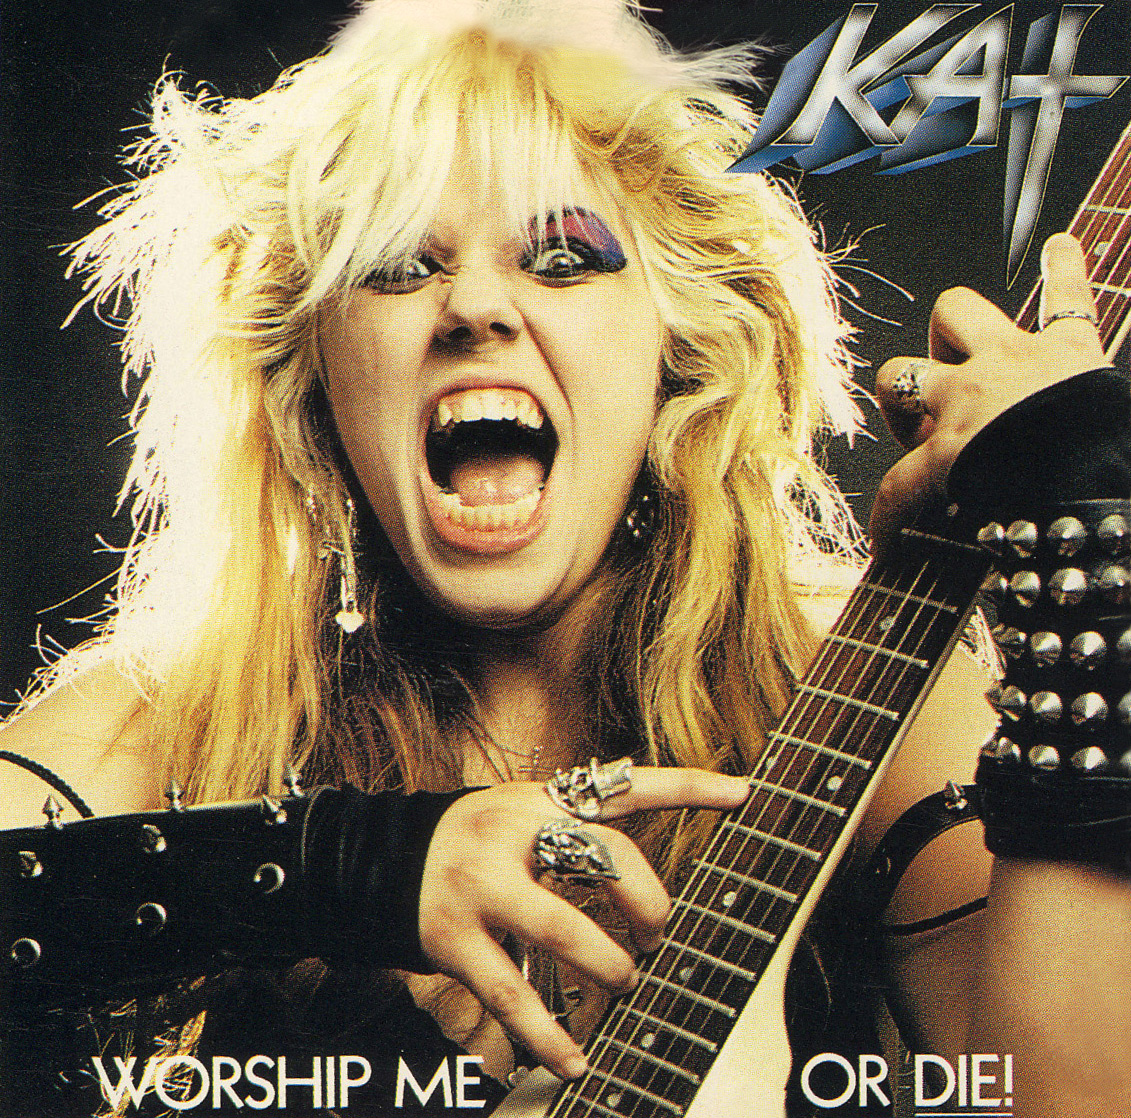 INTERVIEW WITH THE GREAT KAT on DEATH BY METAL STL!